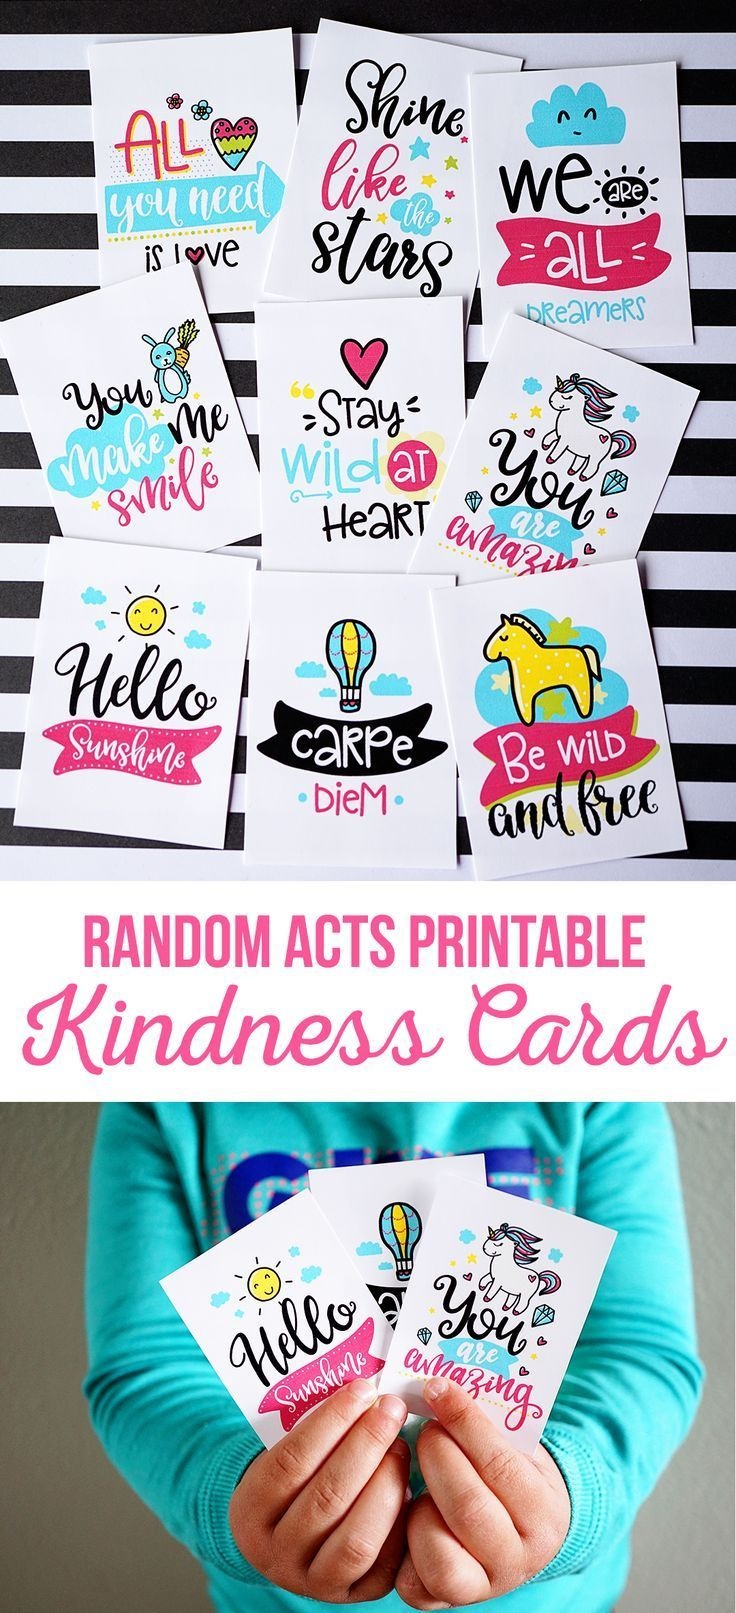 Random Acts Printable Kindness Cards | Free Printables! | Kindness - Free Printable Kindness Cards